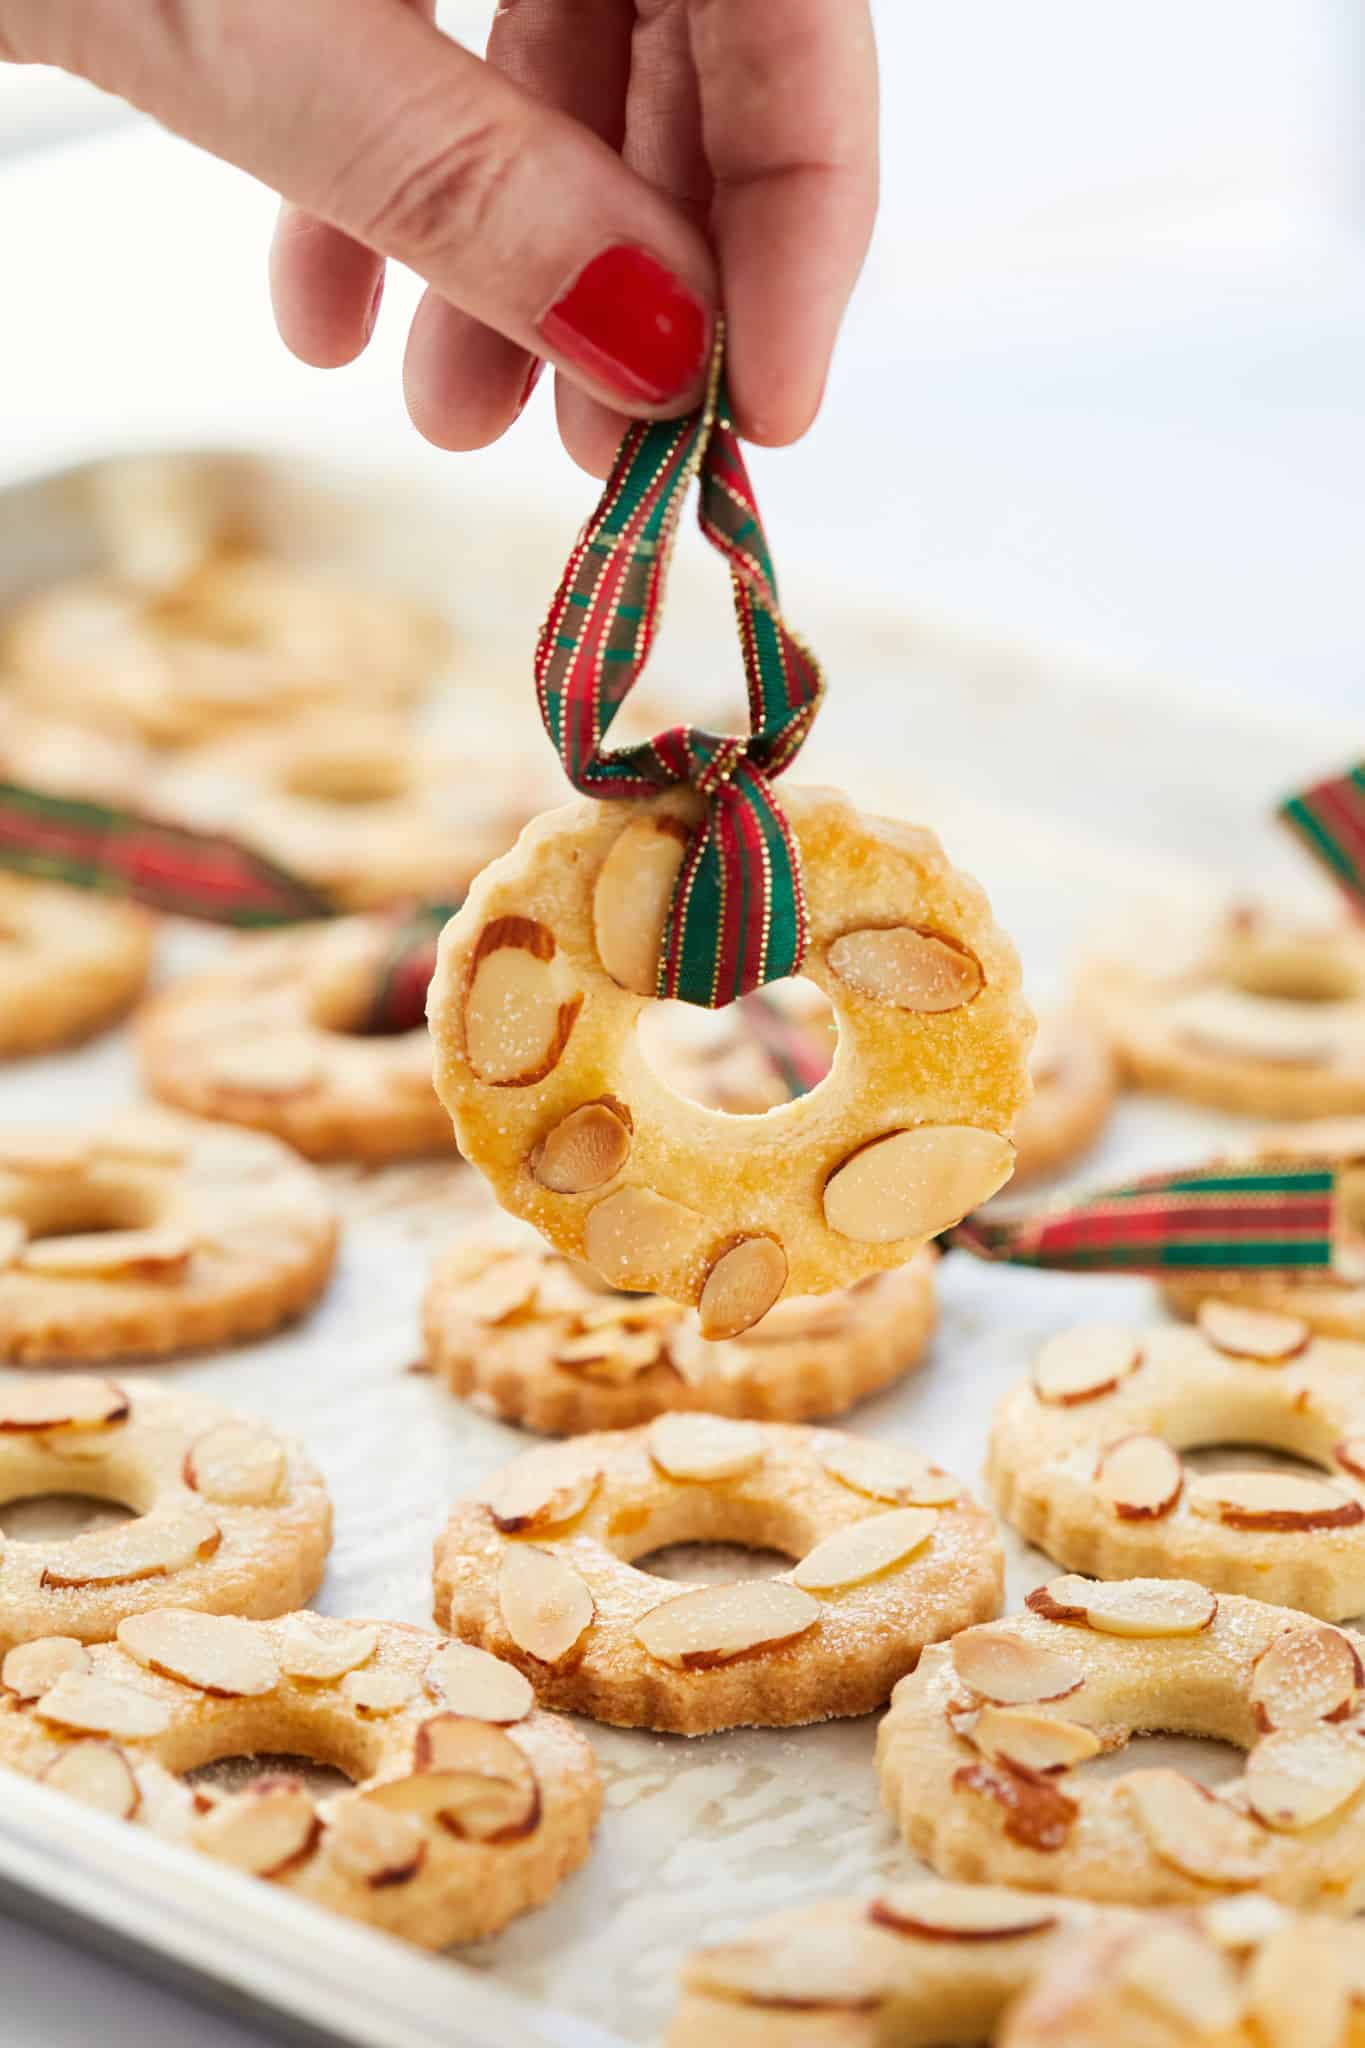 Holding a Kerstkransjes cookie by a ribbon.